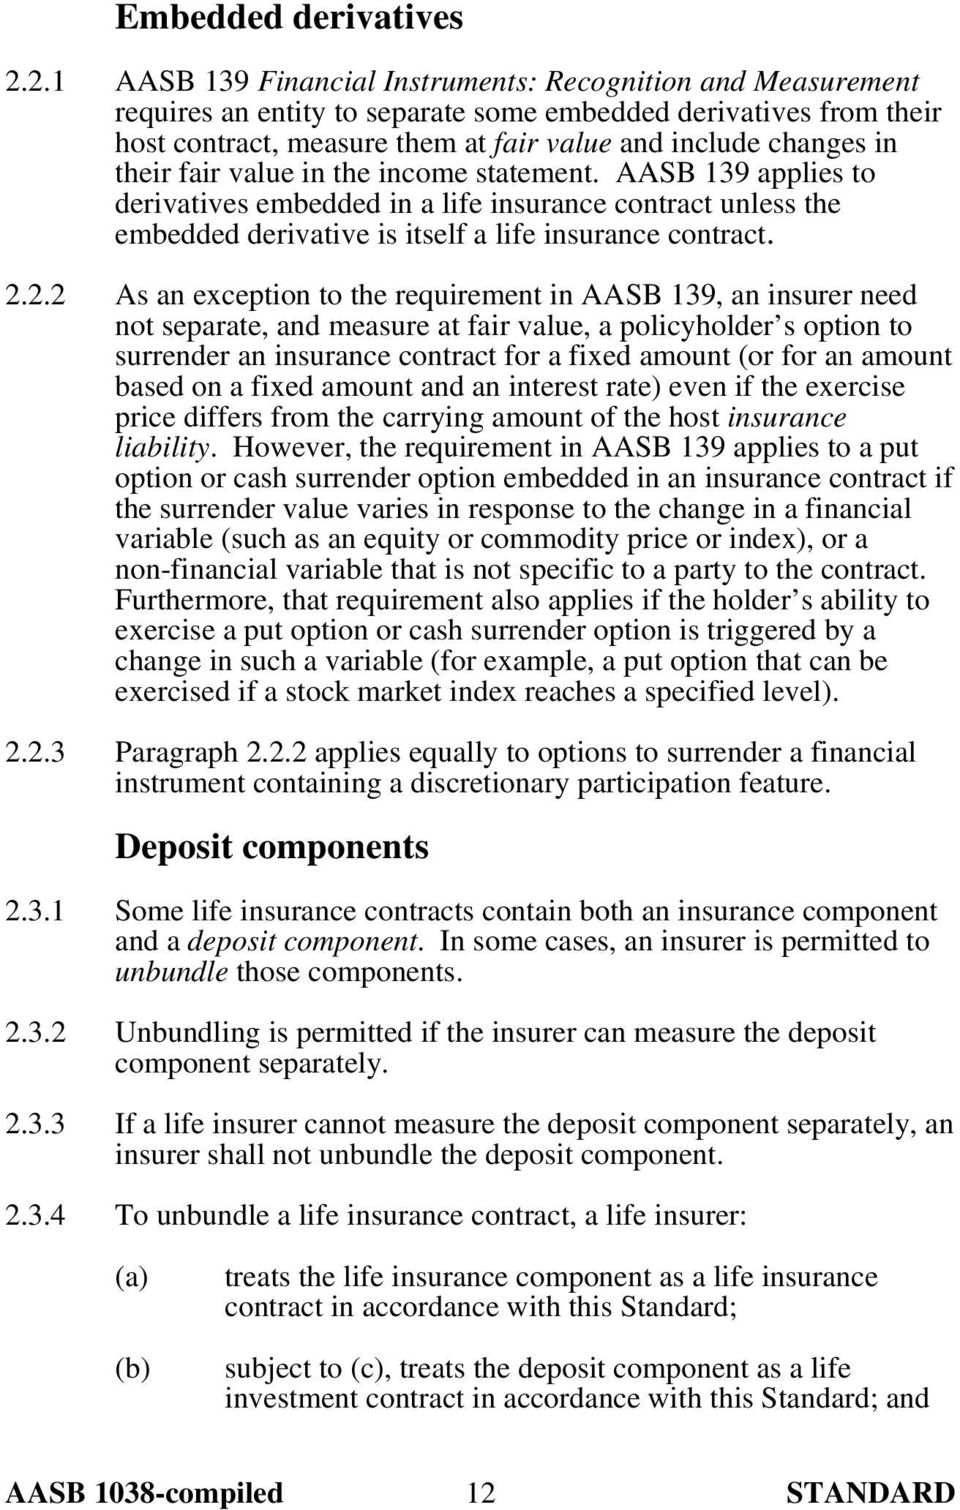 their fair value in the income statement. AASB 139 applies to derivatives embedded in a life insurance contract unless the embedded derivative is itself a life insurance contract. 2.